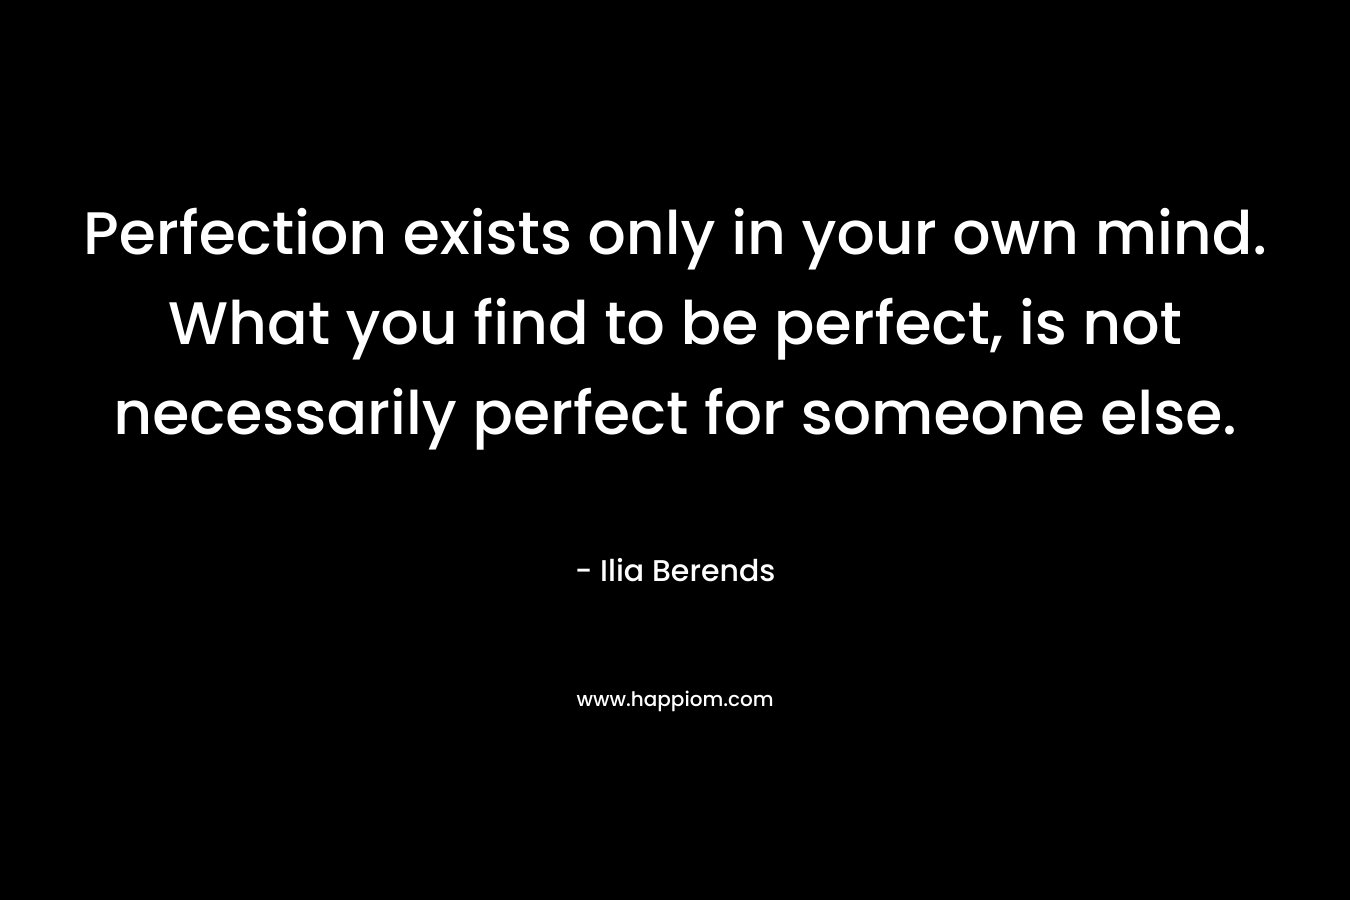 Perfection exists only in your own mind. What you find to be perfect, is not necessarily perfect for someone else.